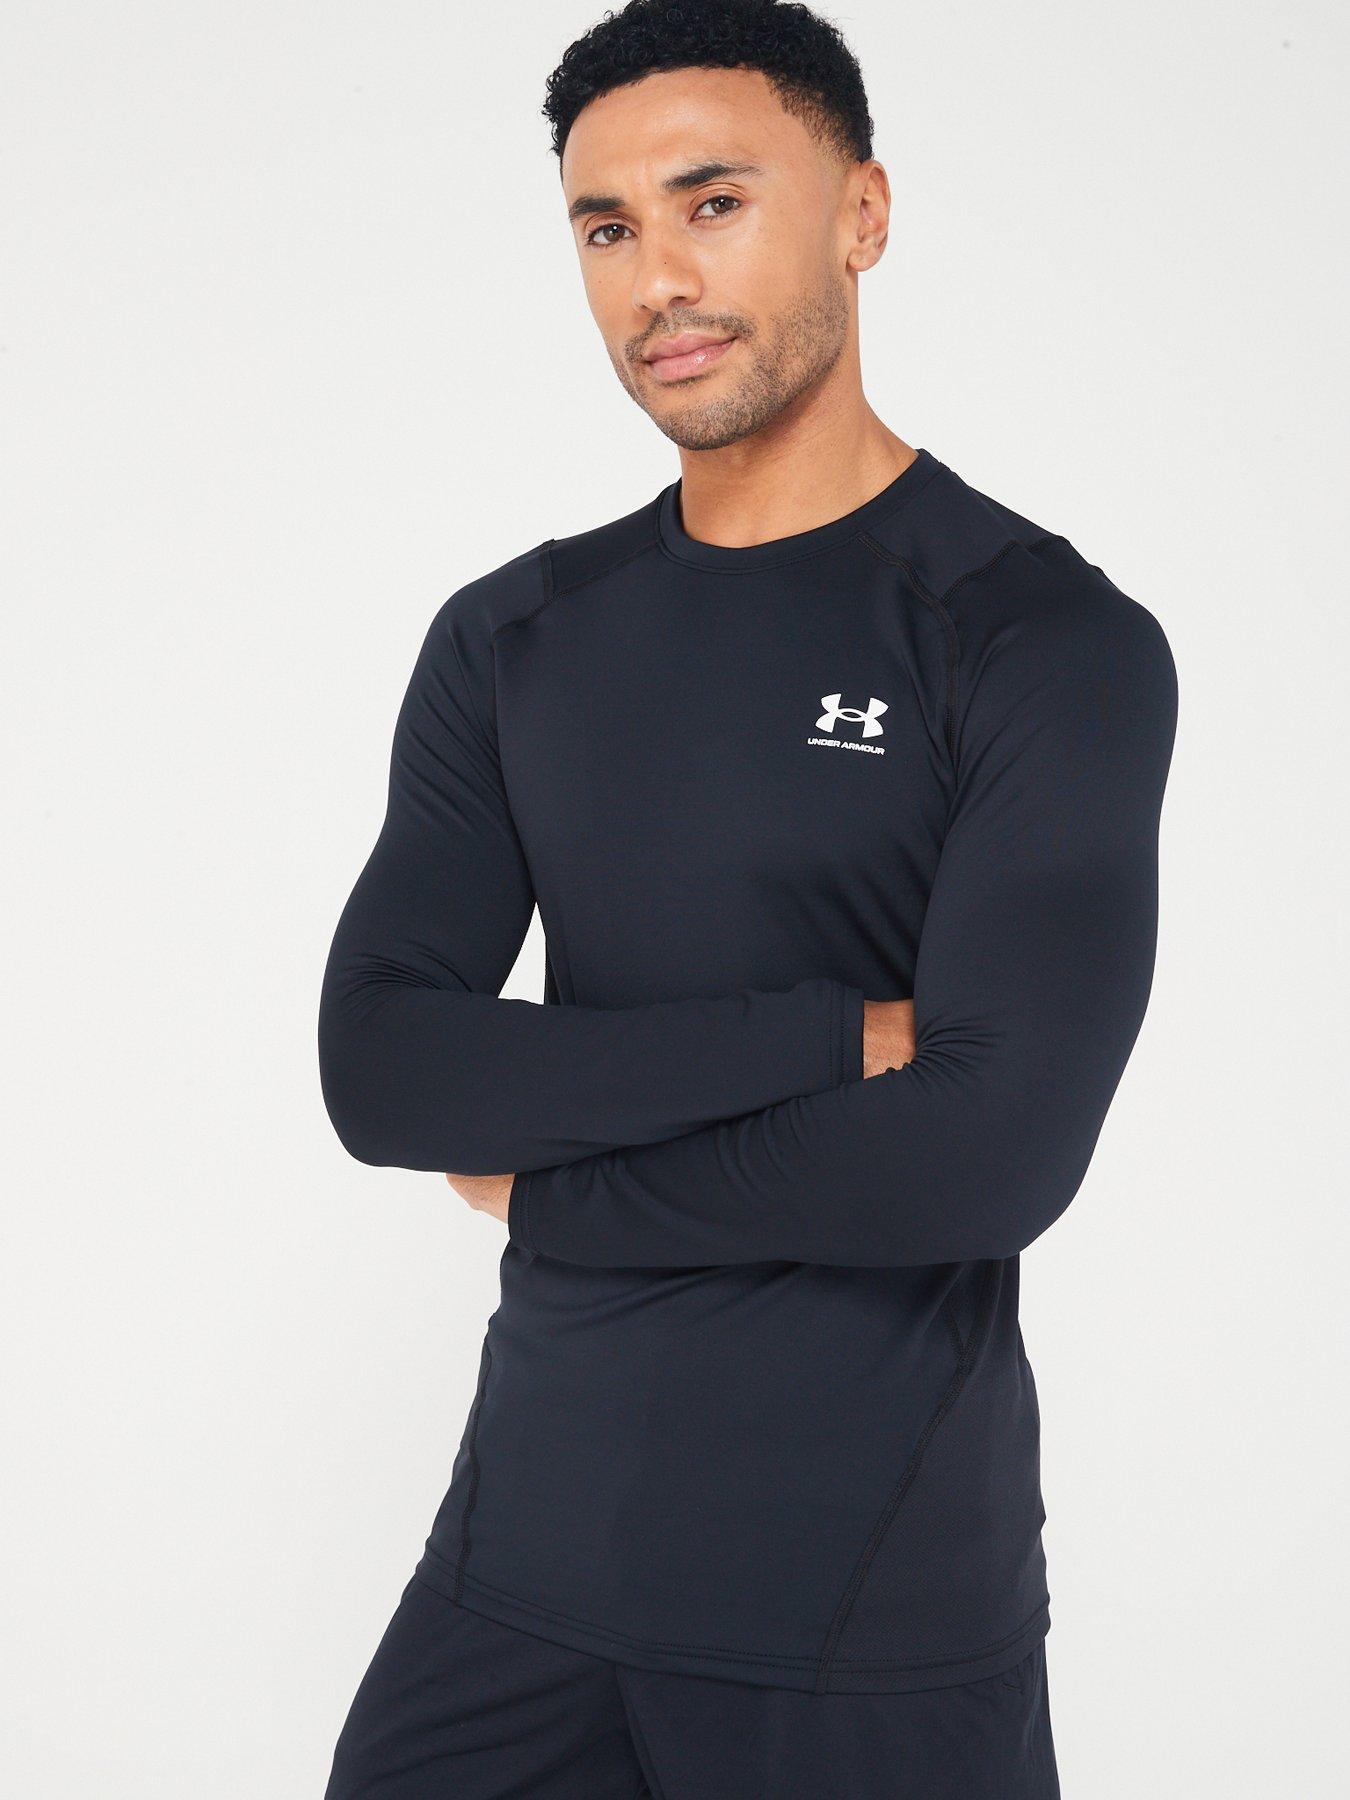 Under Armour Mens Workout Shirts in Mens Workout Clothing 